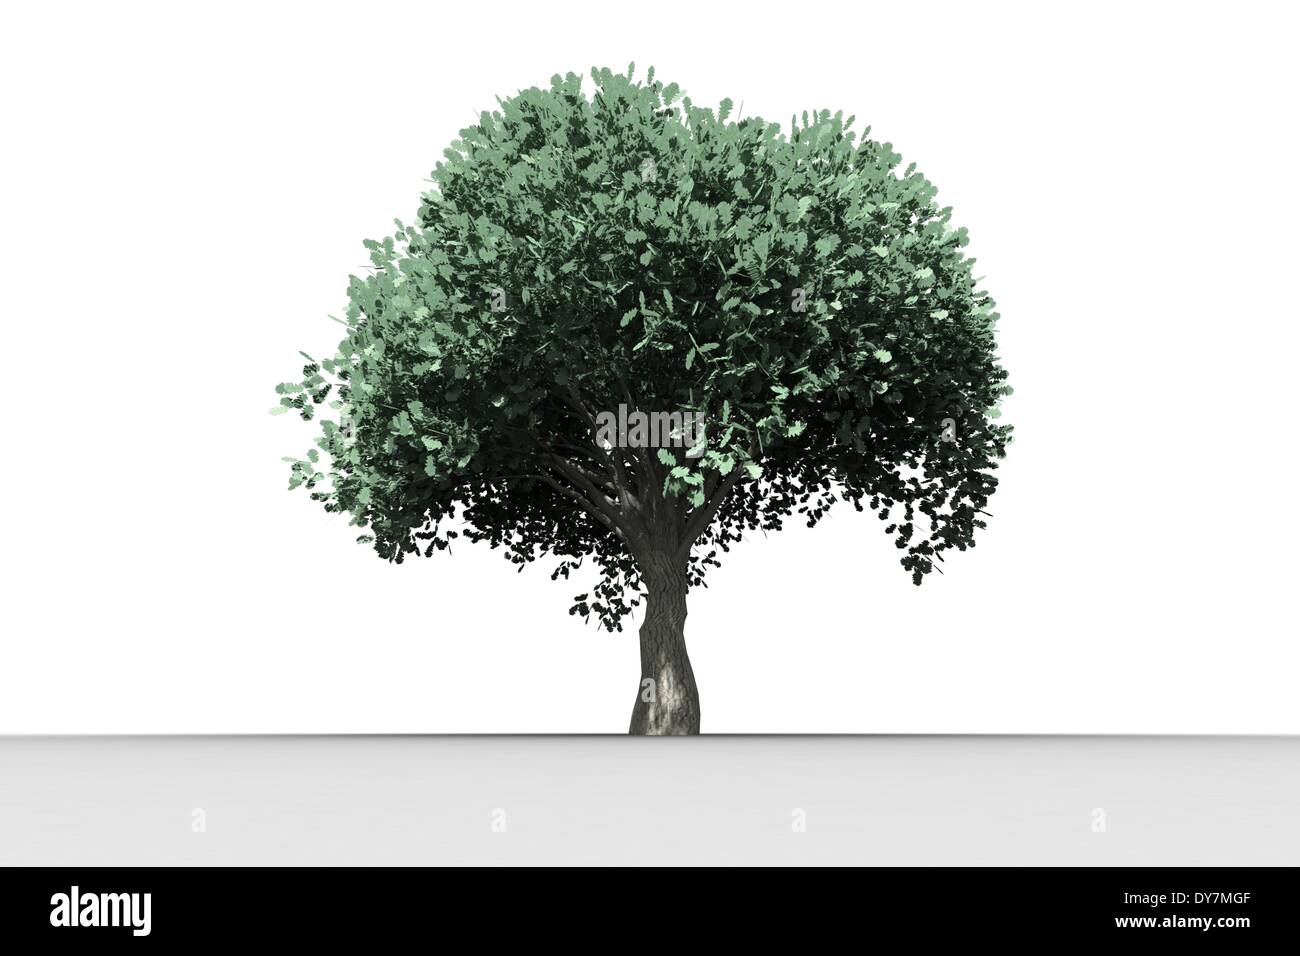 Tree with green leaves growing Stock Photo